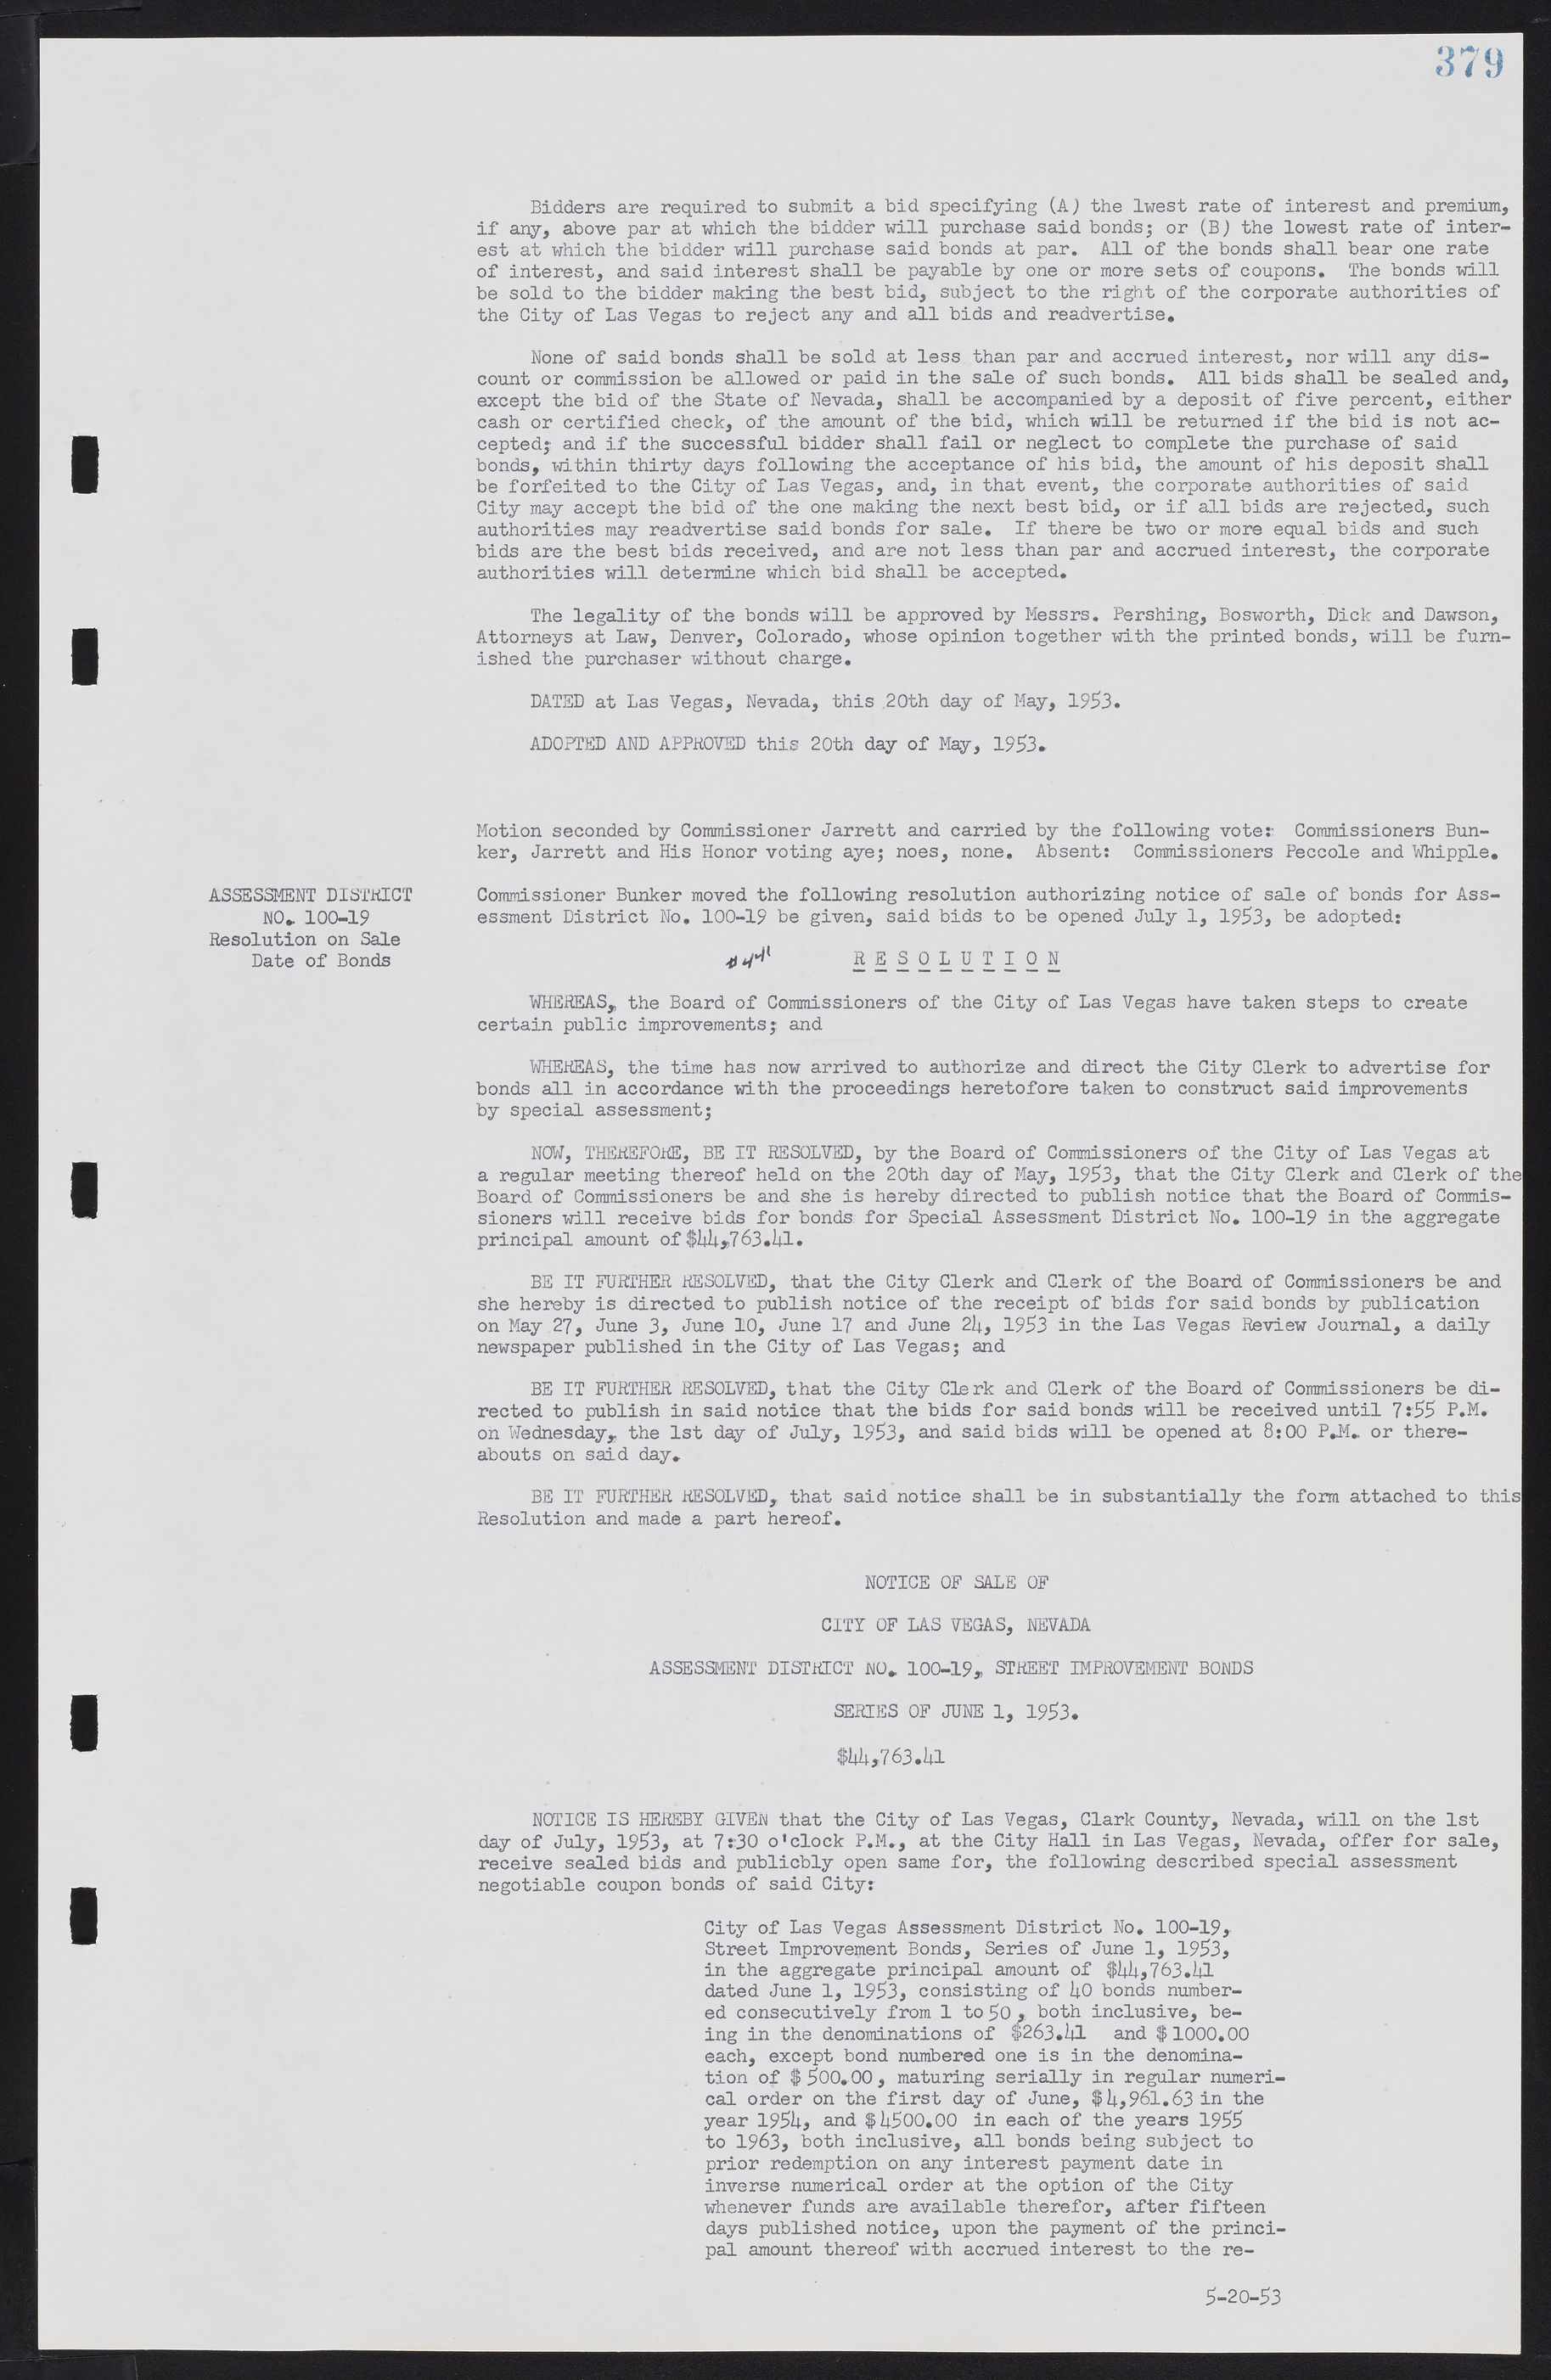 Las Vegas City Commission Minutes, May 26, 1952 to February 17, 1954, lvc000008-407